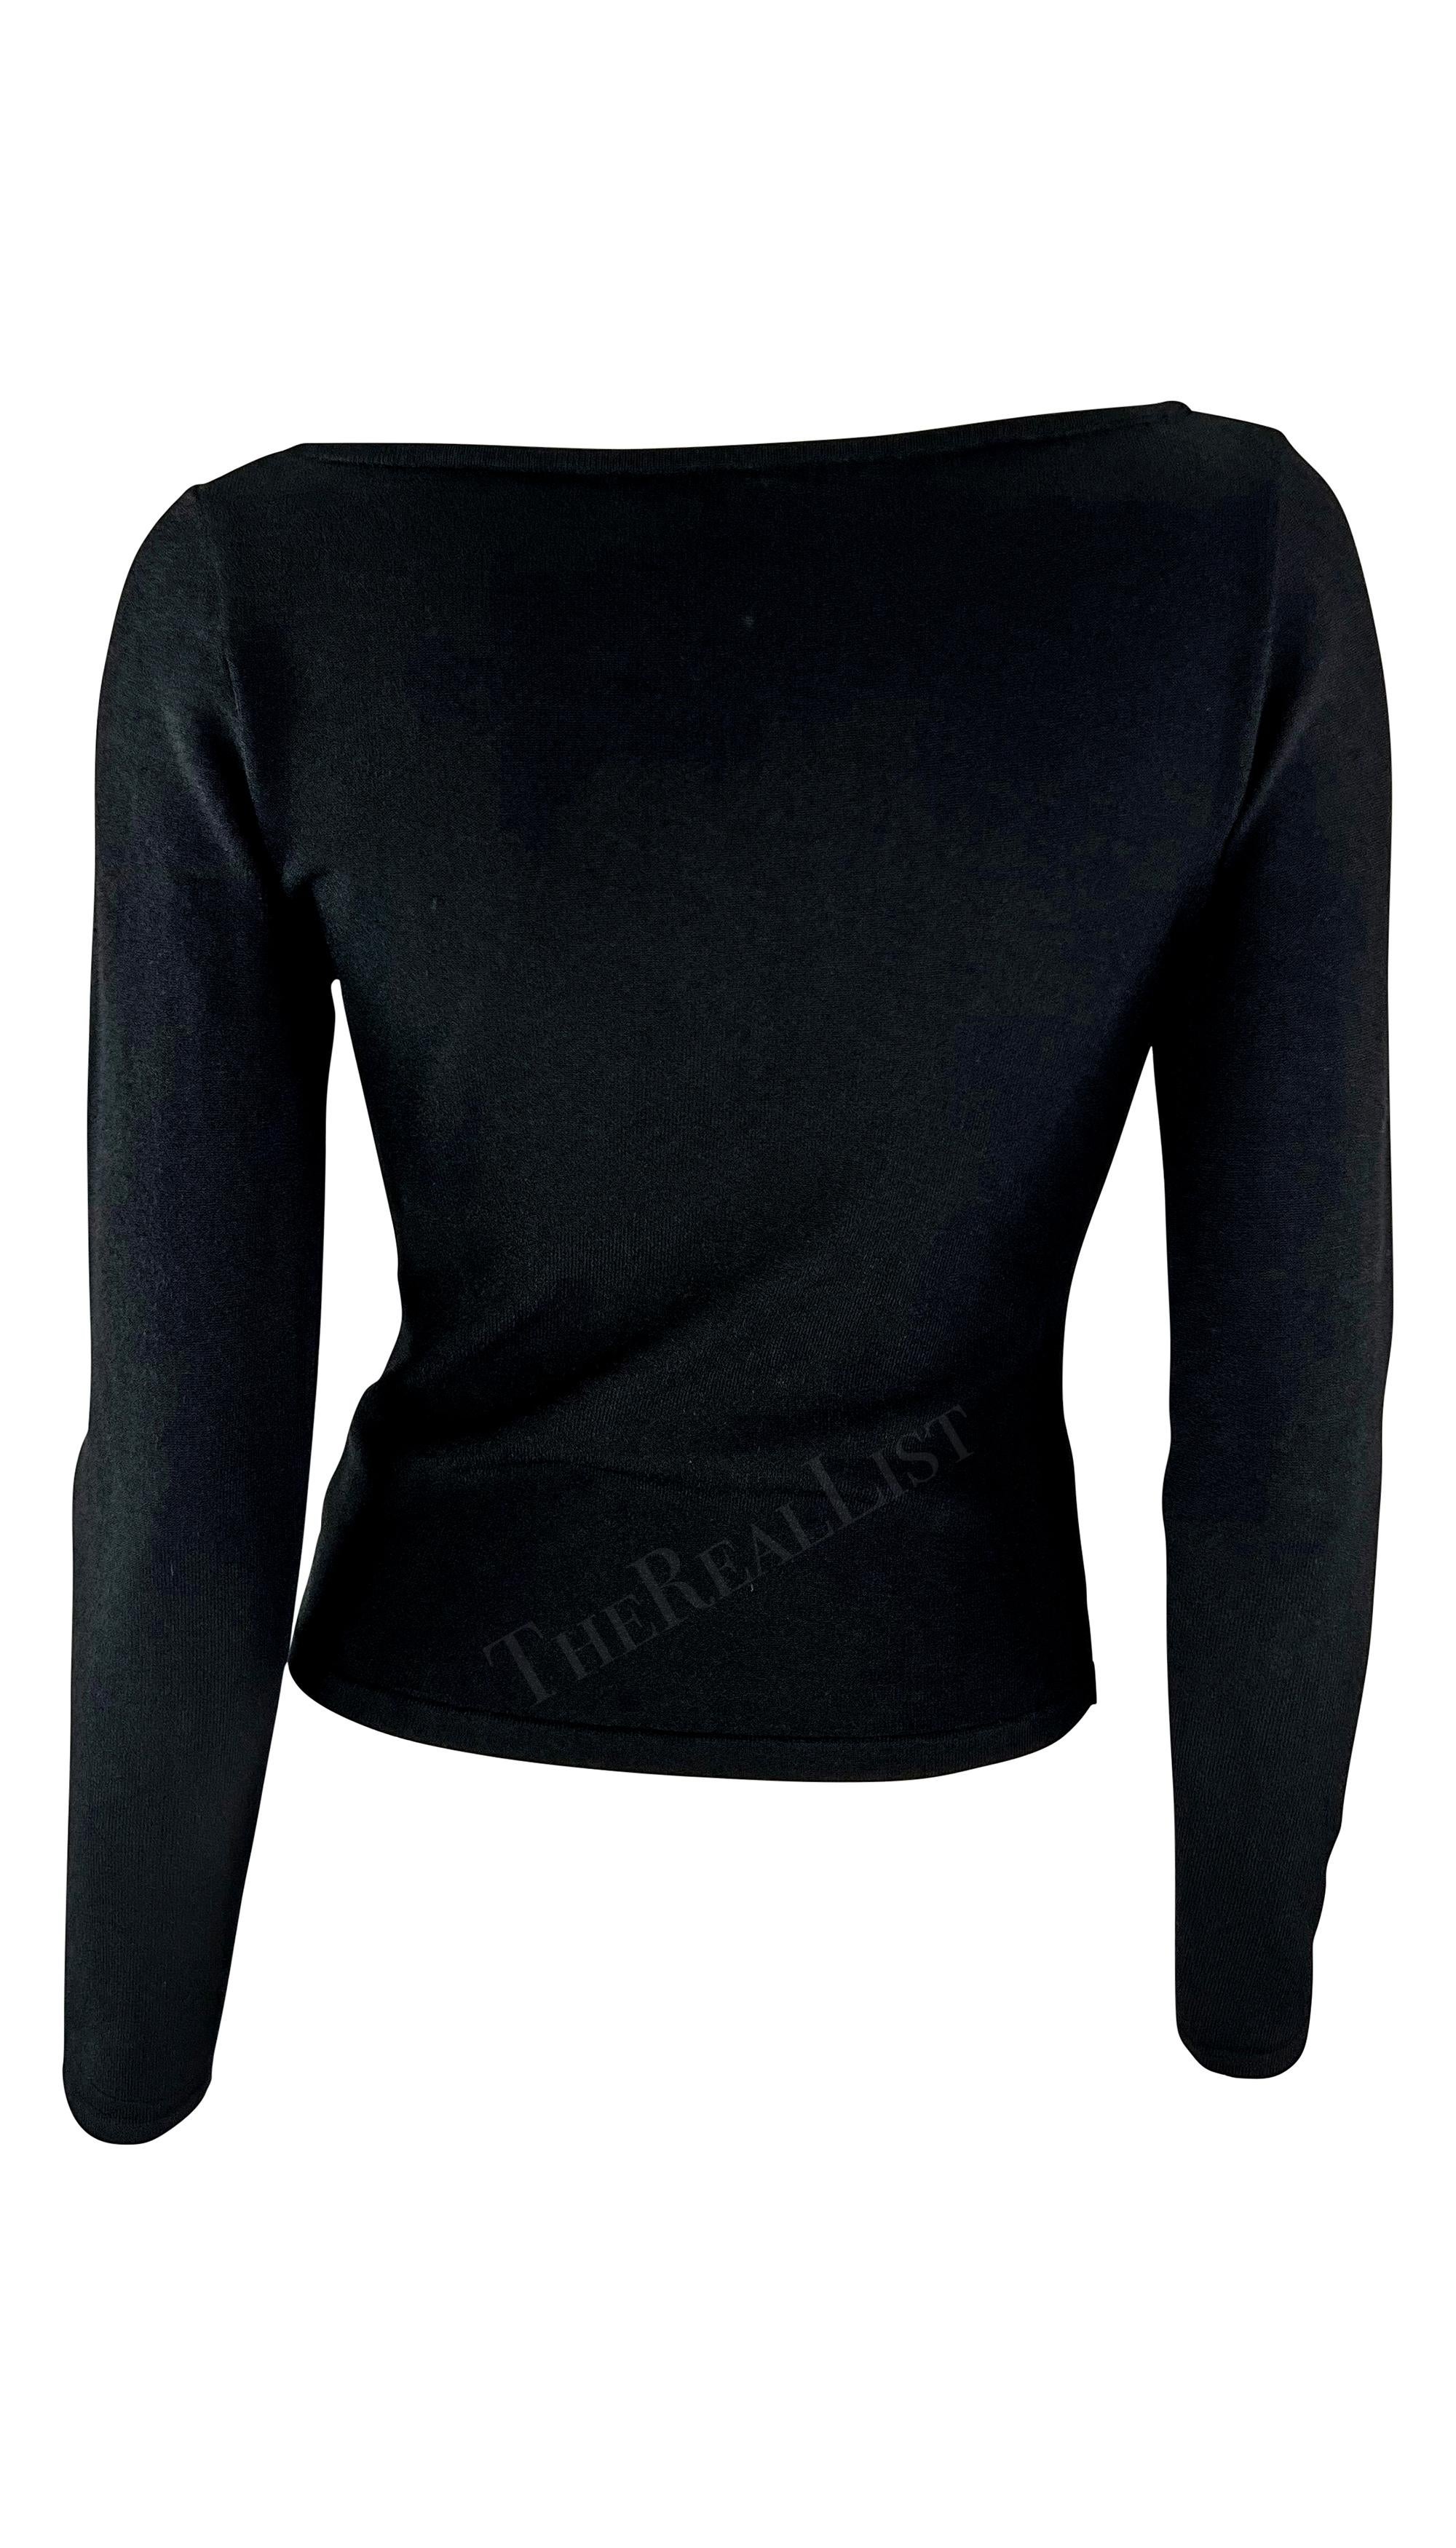 Women's F/W 1999 Gucci by Tom Ford Black Knit Lace Up Sweater Top 